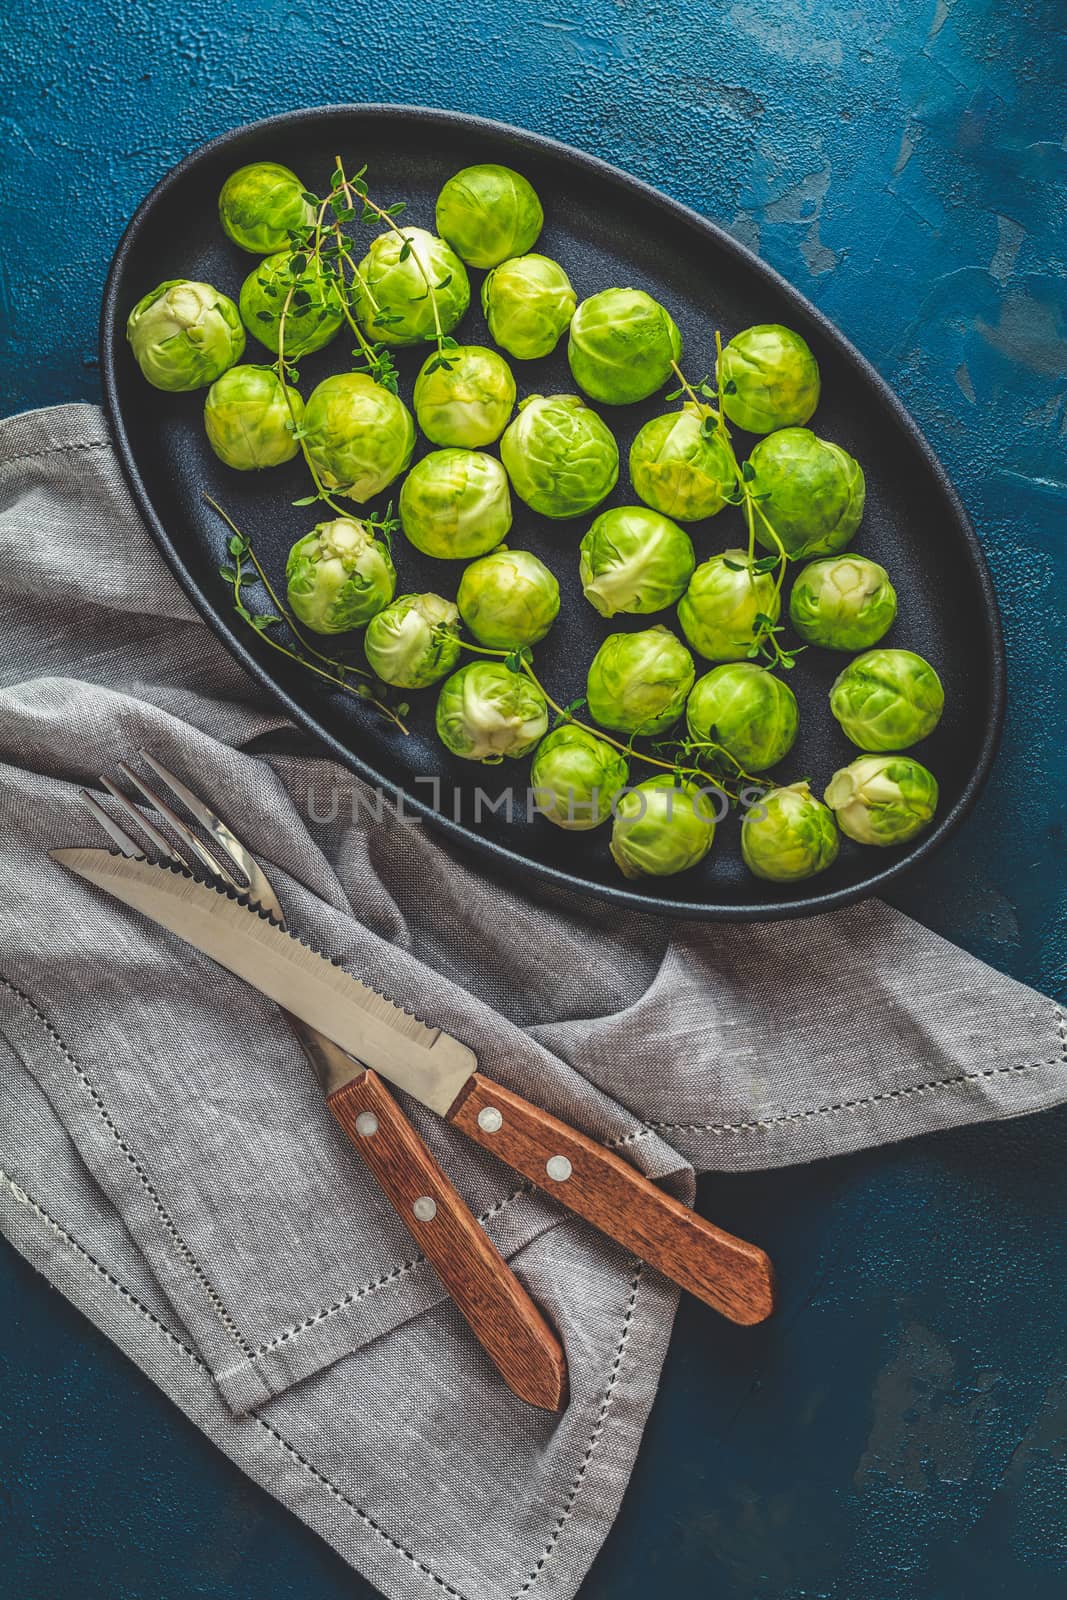 Fresh organic Brussels sprouts in served on black plate, dark blue concrete table surface, copy space for you text.